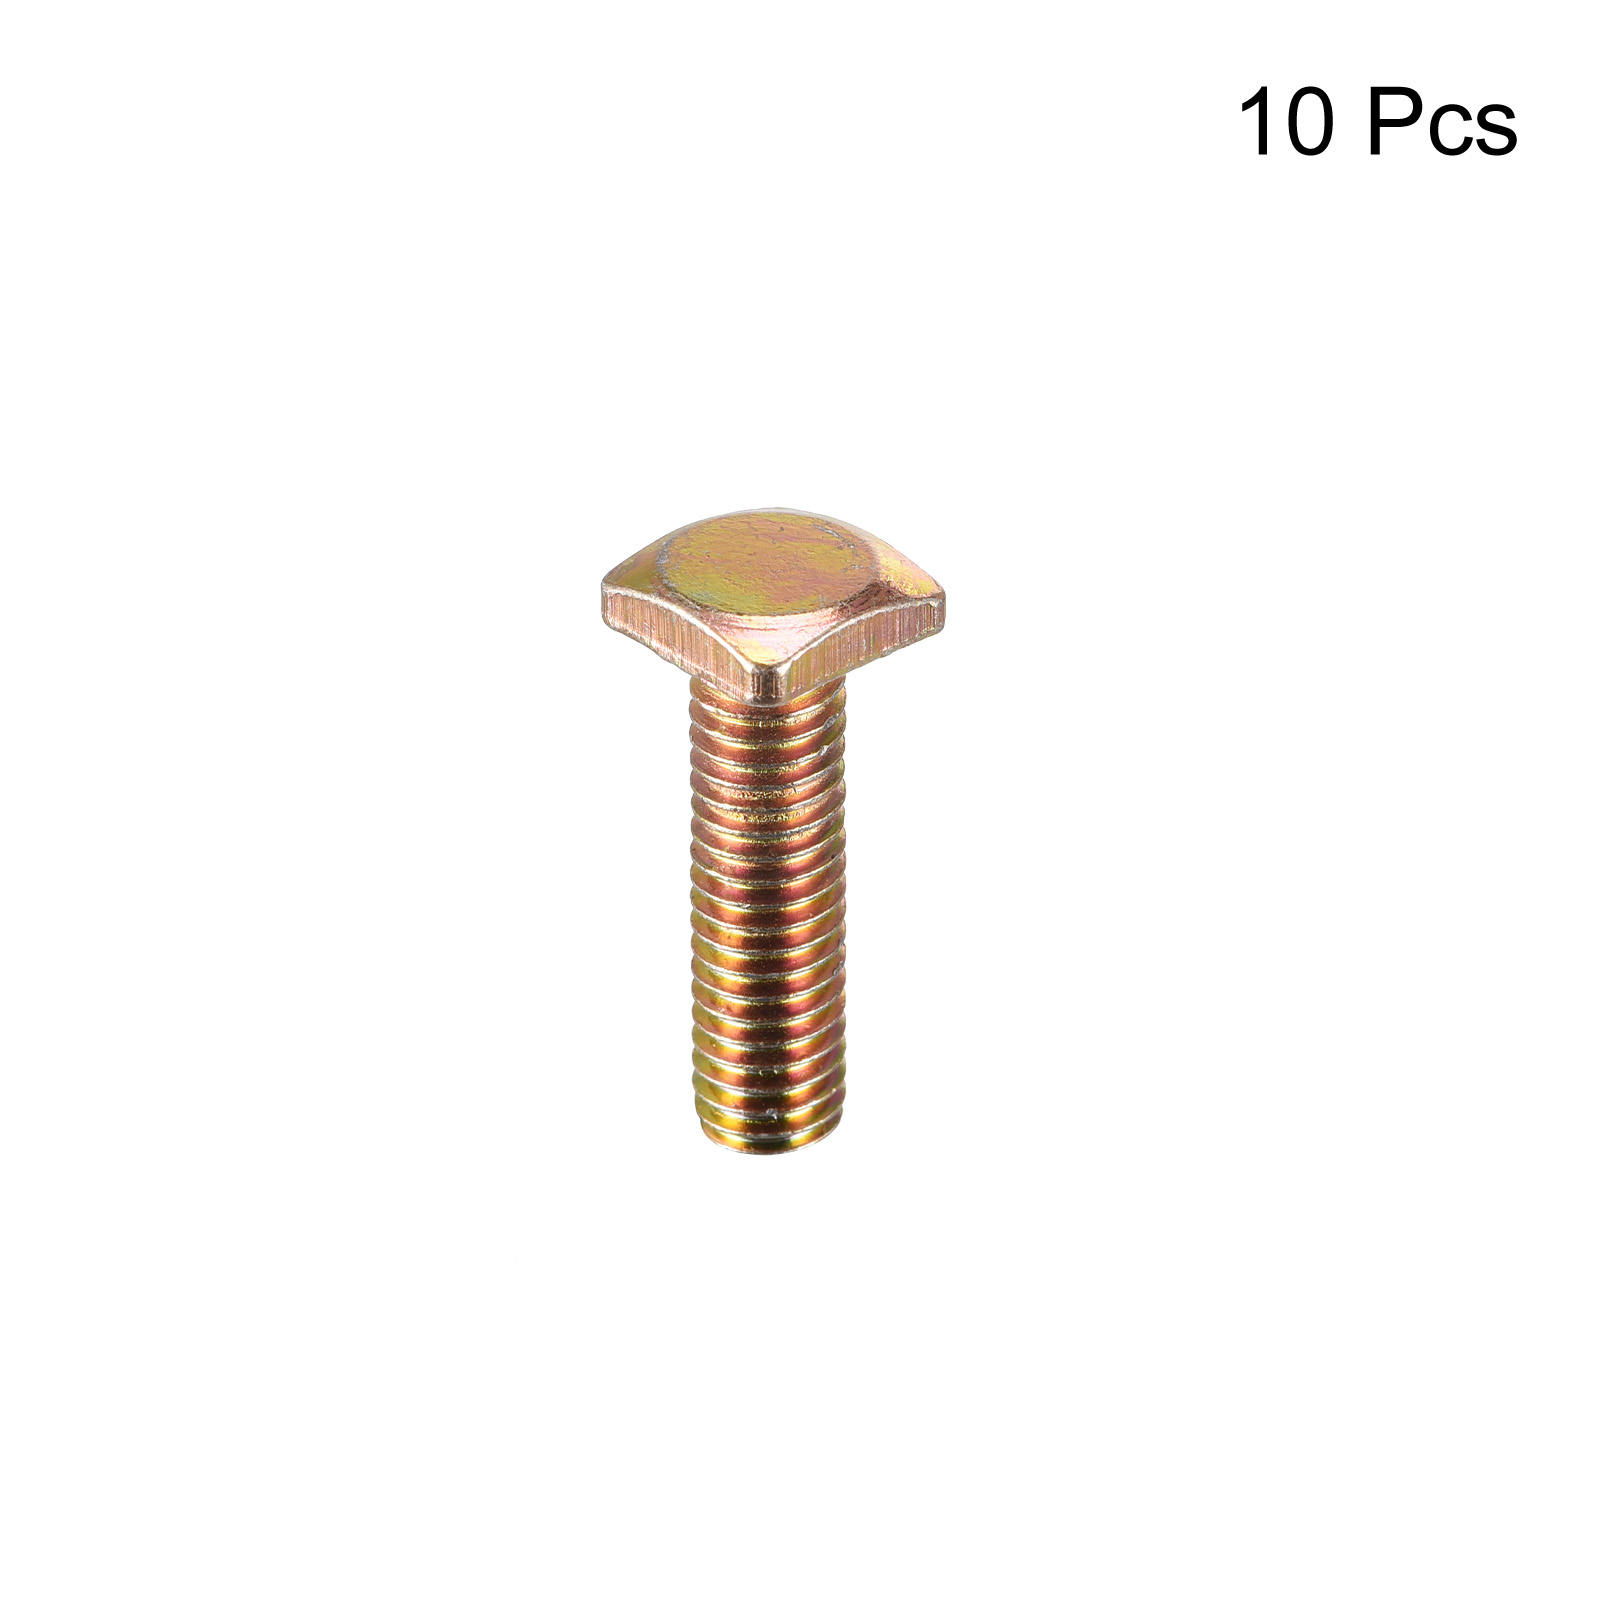 Square Head Bolt, 10 Pack M6x22mm Carbon Steel Grade 4.8 Square Screws, Gold Tone - image 3 of 5